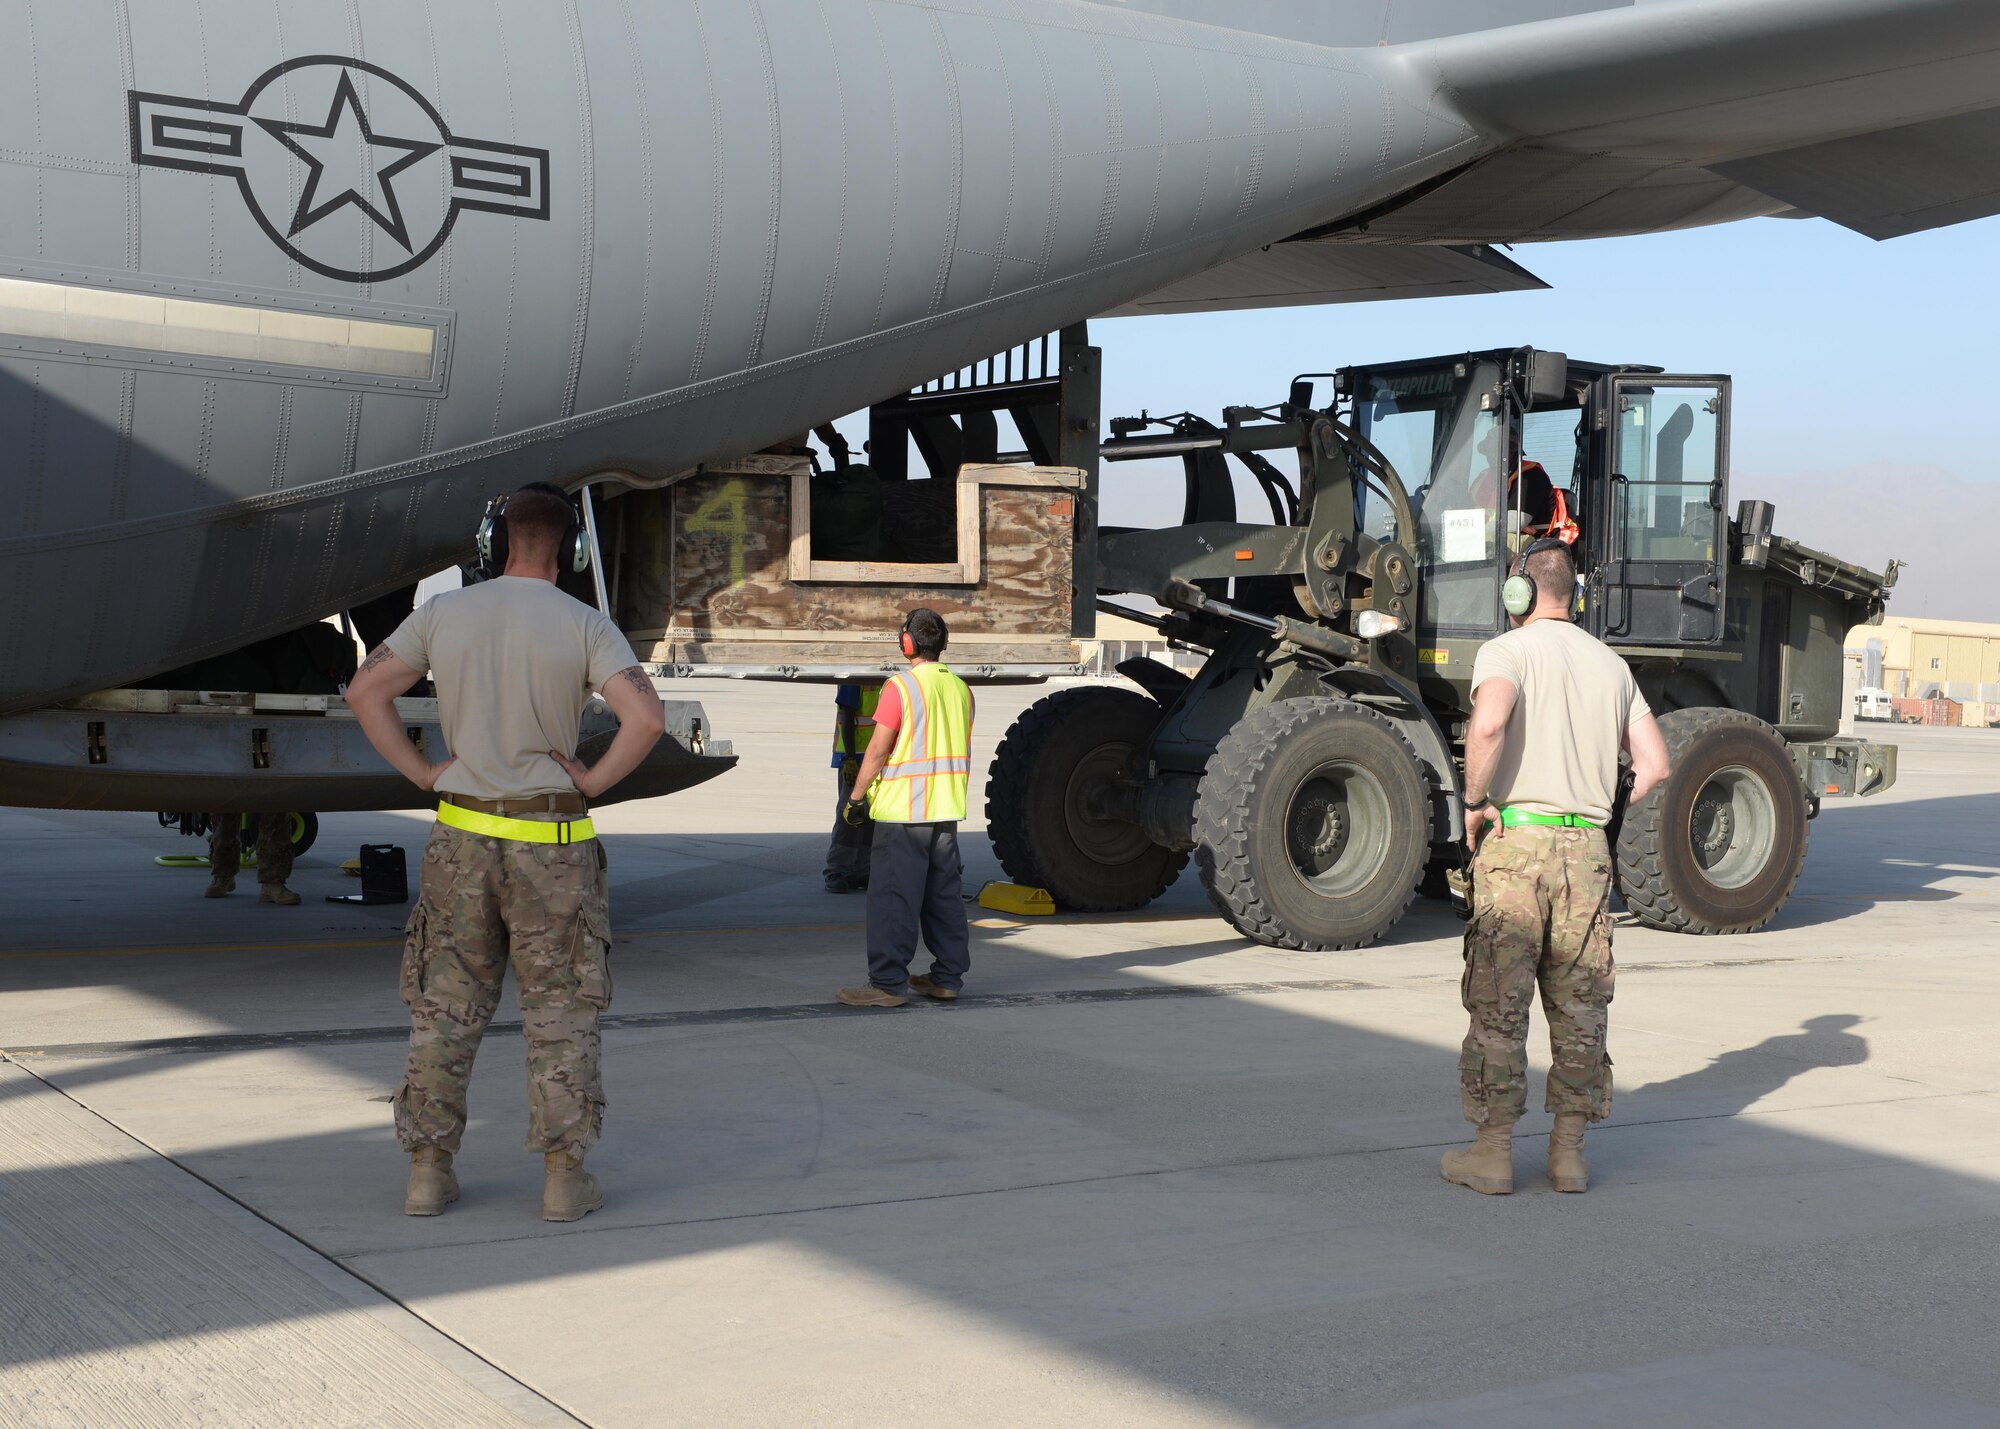 C-130J Super Hercules crew chiefs assist loadmasters with moving cargo onto an aircraft before take-off Aug. 28, 2015, at Bagram Airfield, Afghanistan. Strauss and his fellow loadmasters are responsible for loading and unloading cargo, passenger safety in flight, and ensuring the aircraft stays within the proper weight and balance limitations. (U.S. Air Force photo by Senior Airman Cierra Presentado/Released)